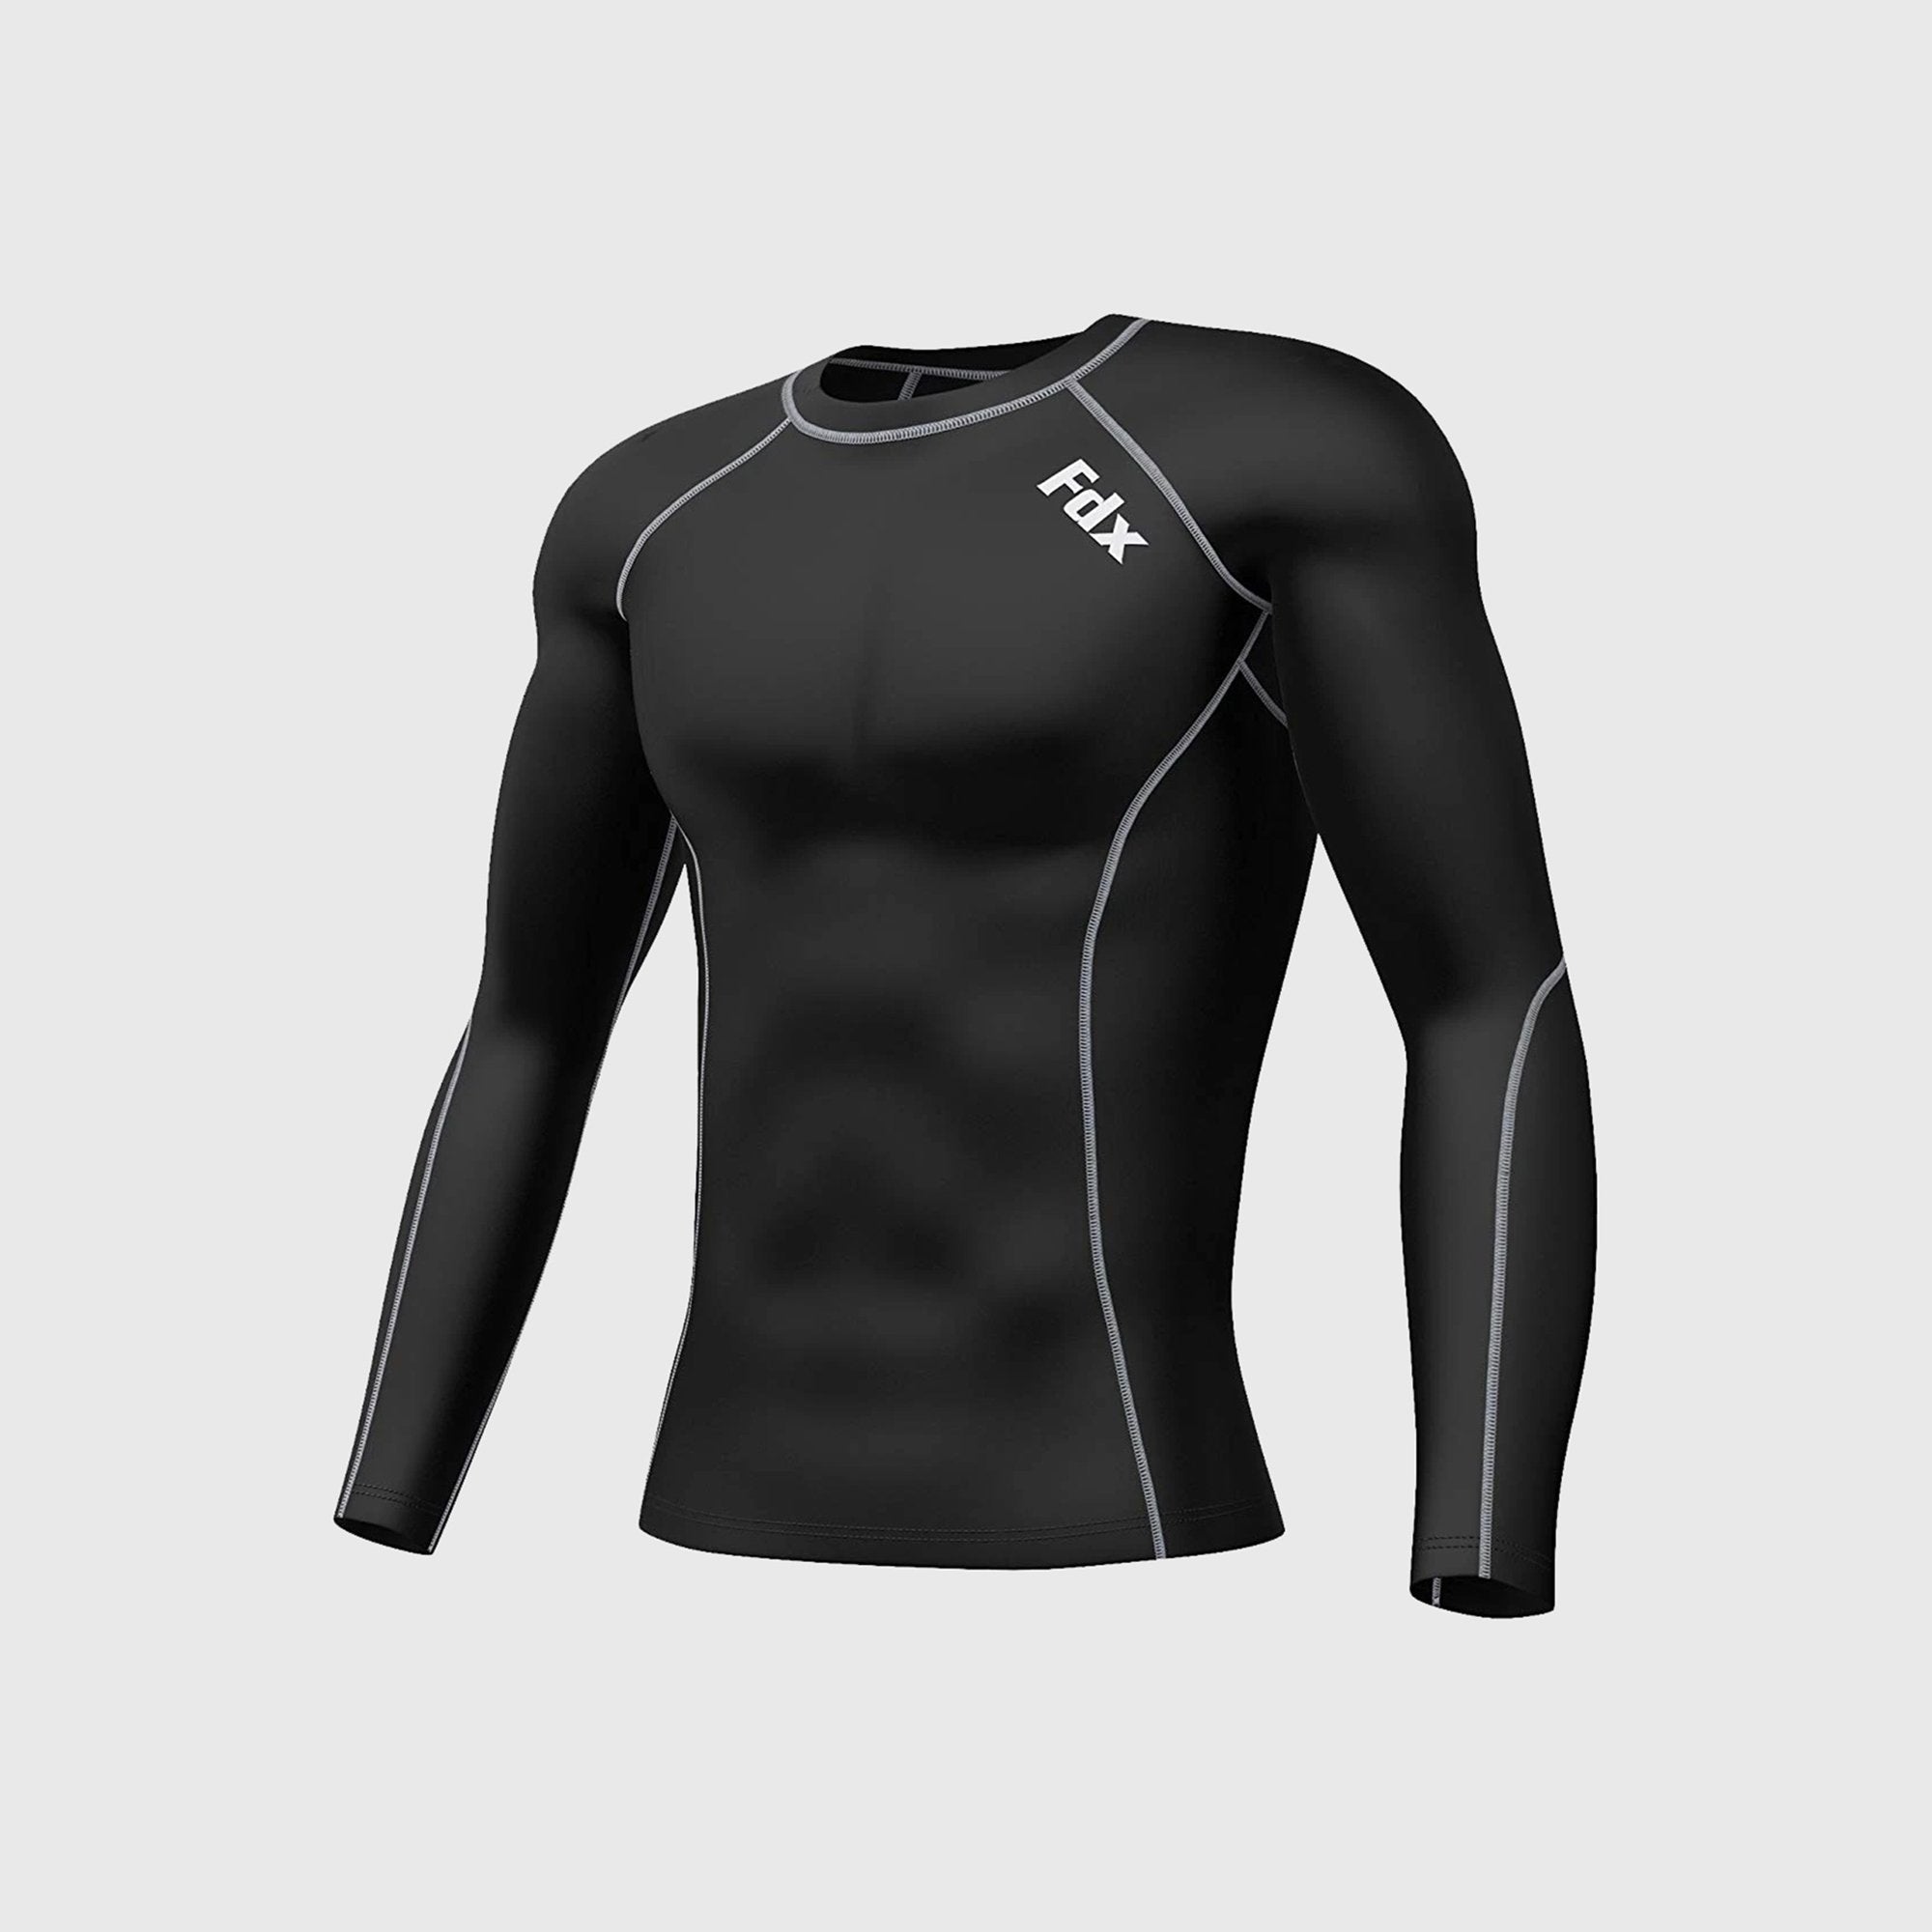 Fdx Mens Black & Grey Long Sleeve Compression Top Running Gym Workout Wear Rash Guard Stretchable Breathable - Blitz